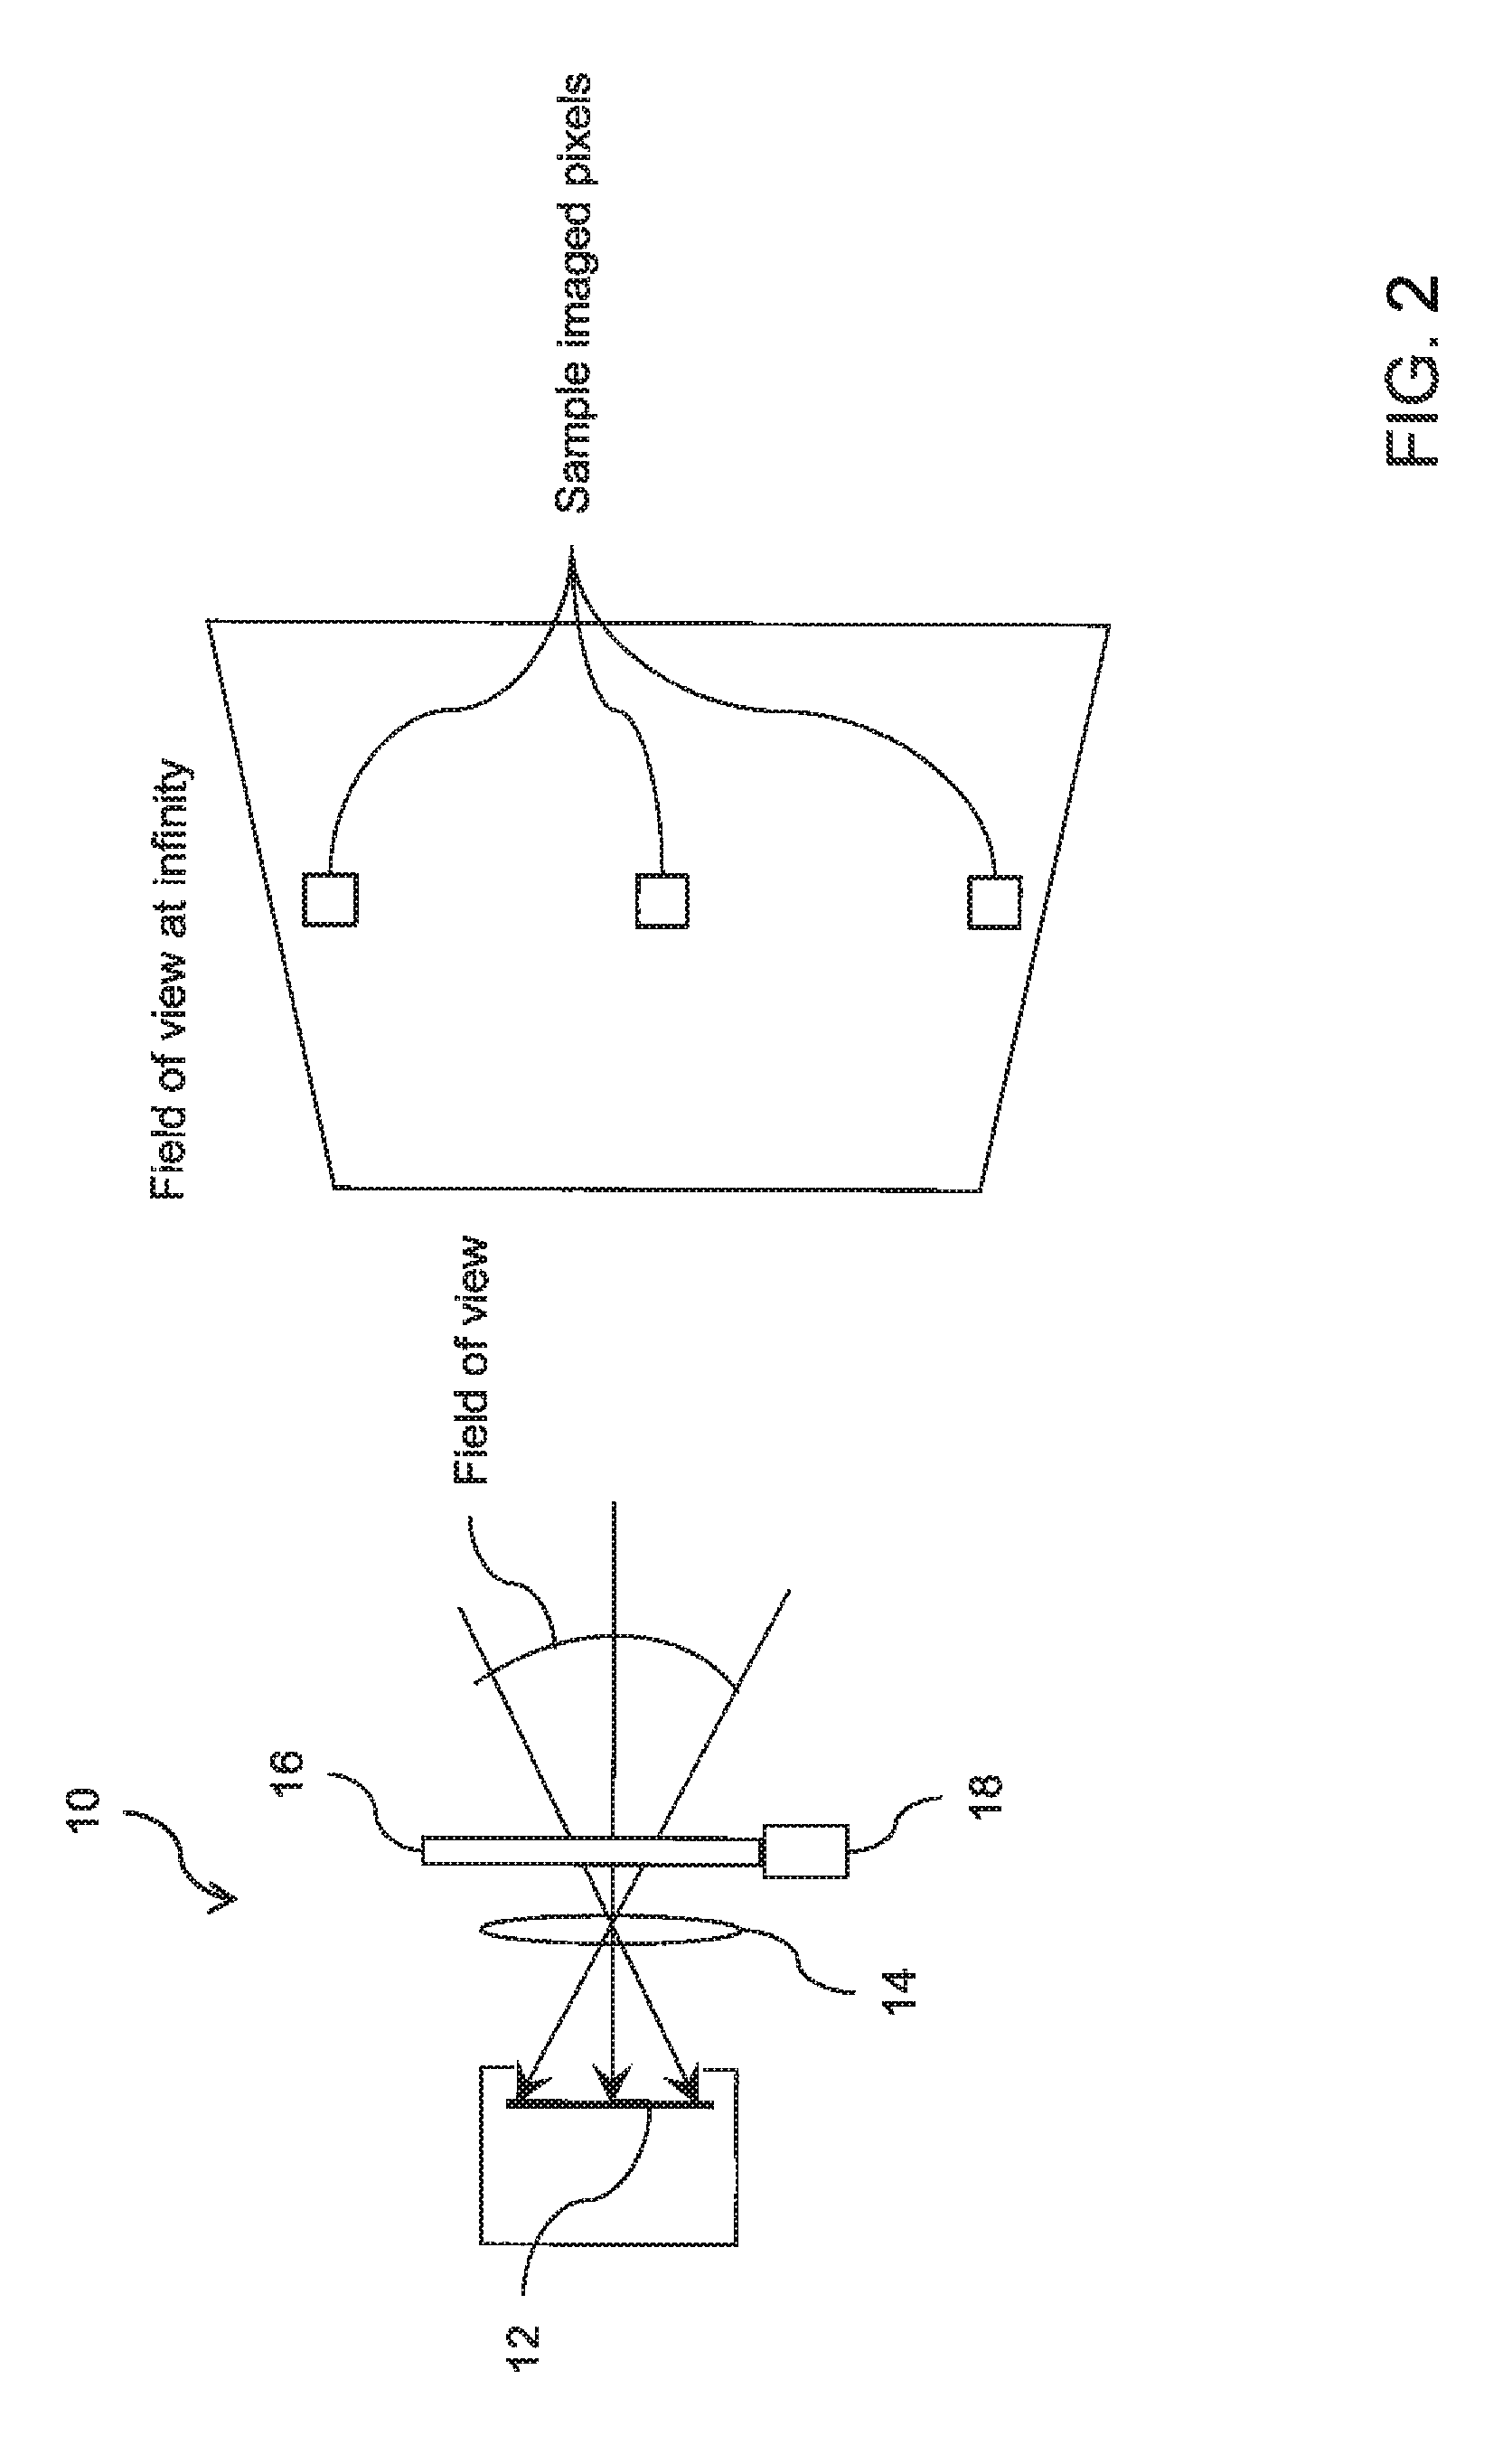 Infrared detection and imaging device with no moving parts